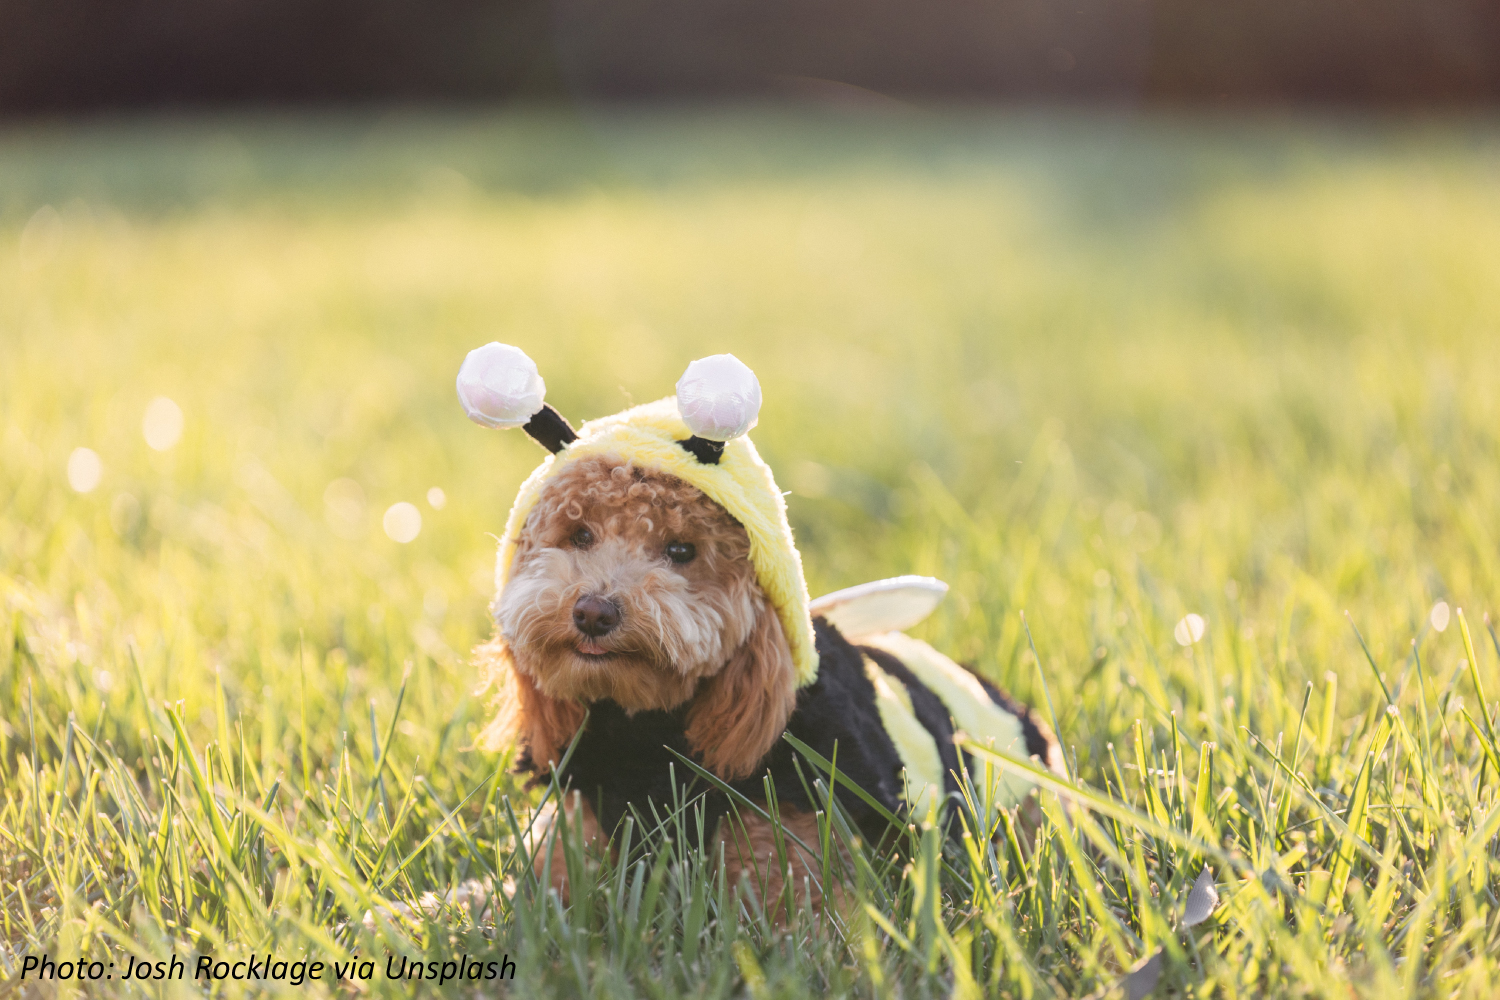 National “Dress Up Your Pet” Day